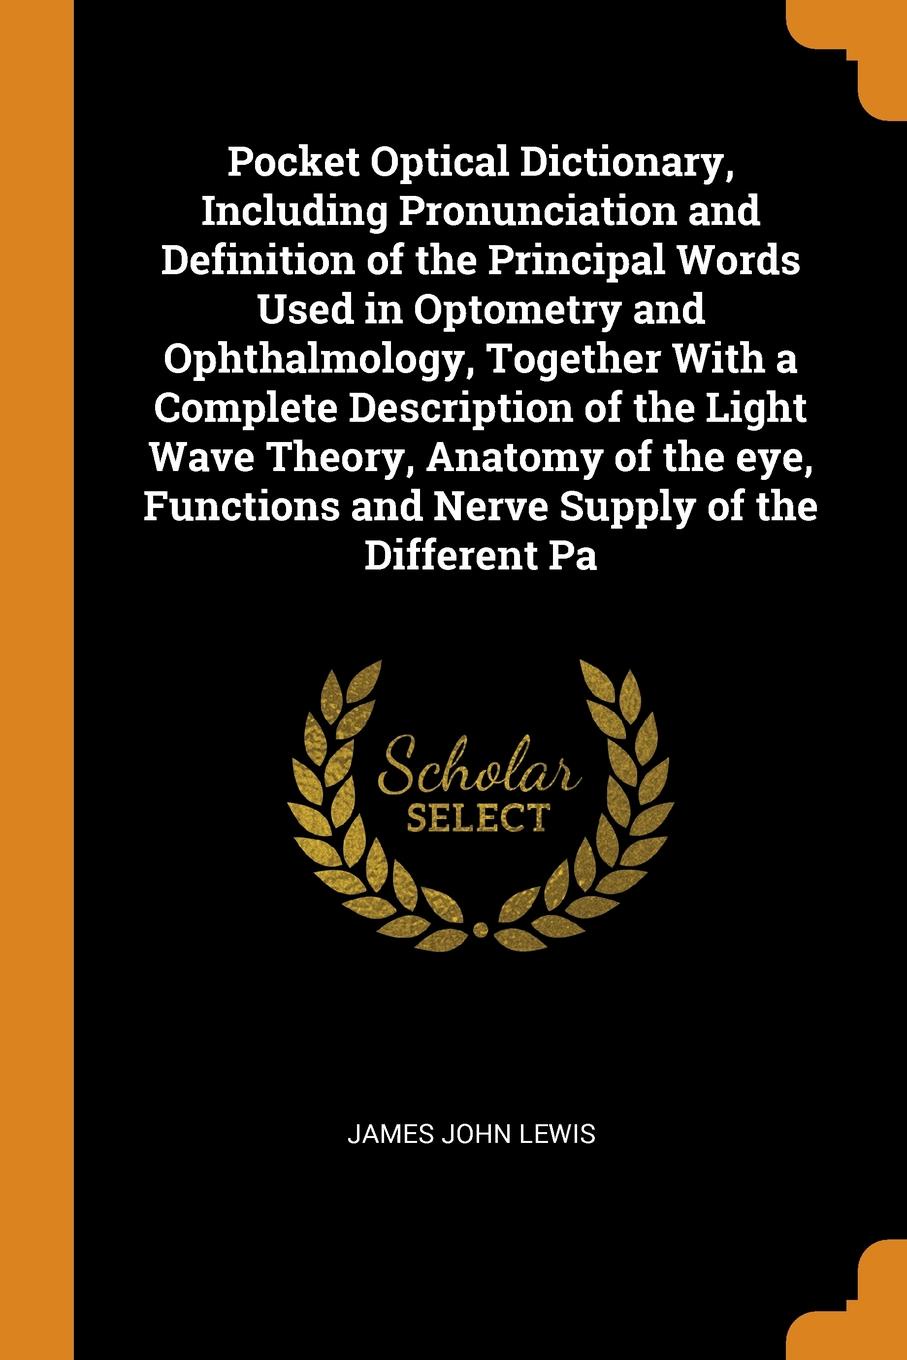 Pocket Optical Dictionary, Including Pronunciation and Definition of the Principal Words Used in Optometry and Ophthalmology, Together With a Complete Description of the Light Wave Theory, Anatomy of the eye, Functions and Nerve Supply of the Diff...